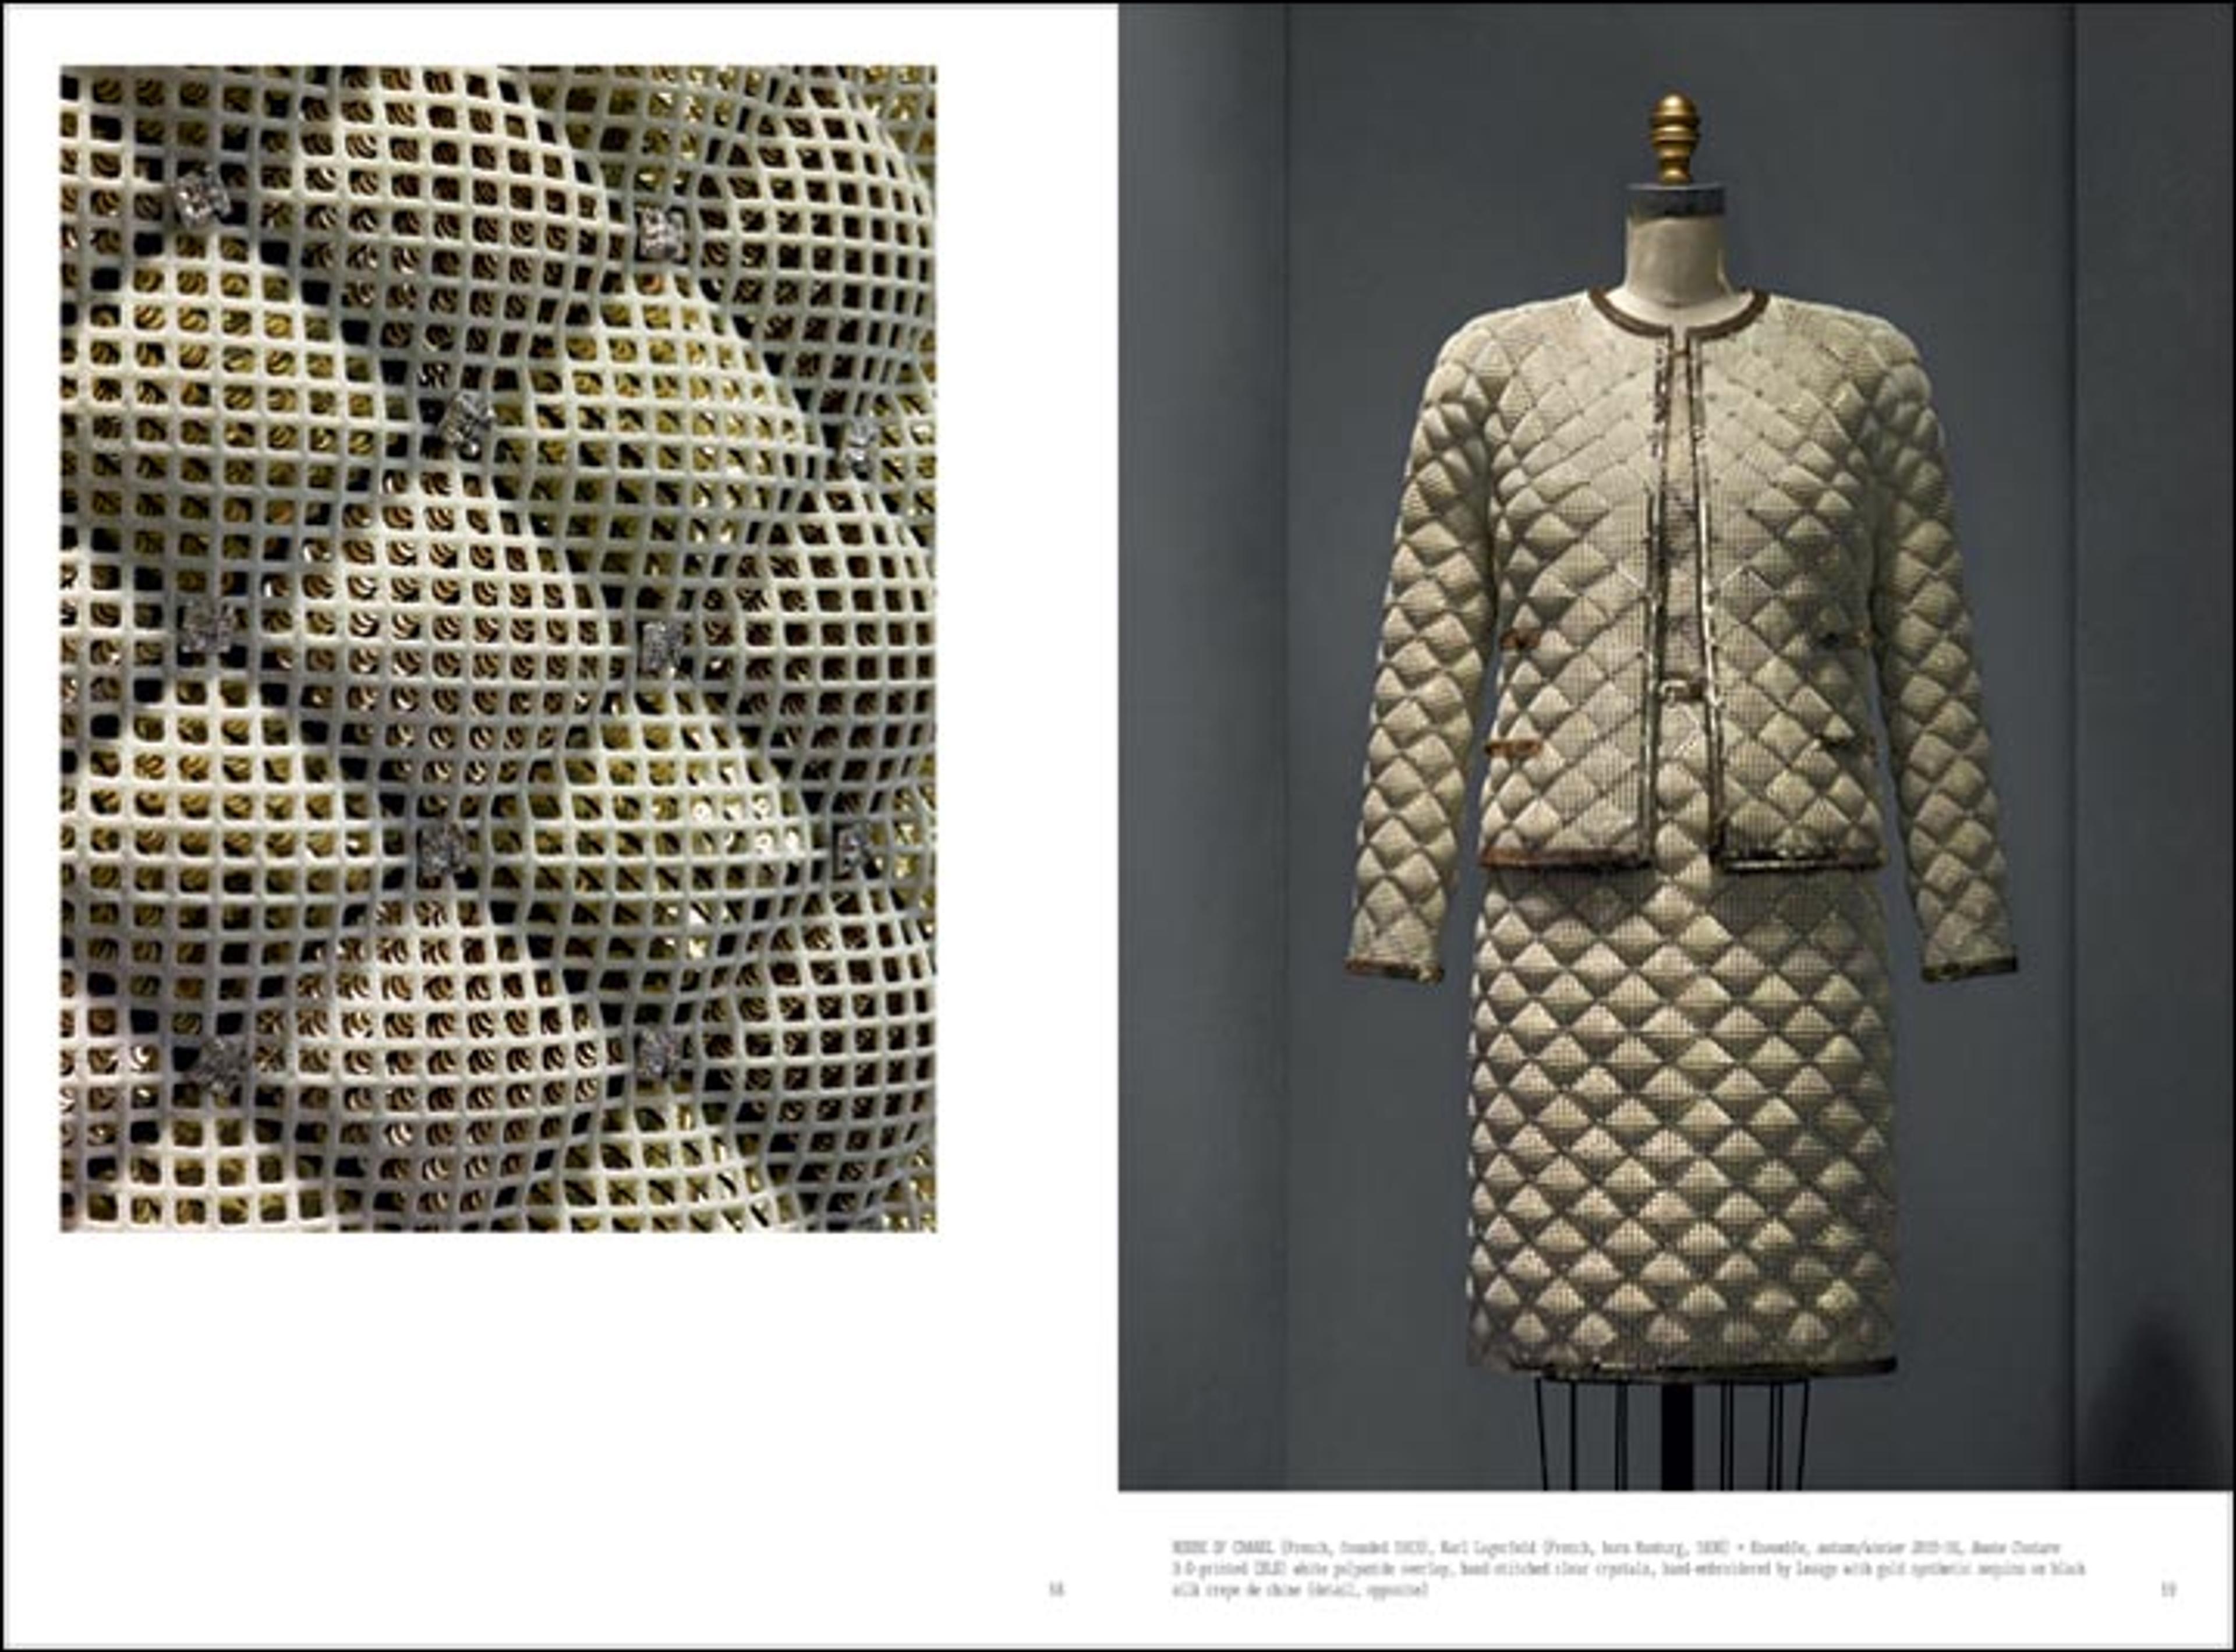 Spread from the publication with a 3D-printed Chanel suit and a detail showing the sequin pattern underneath